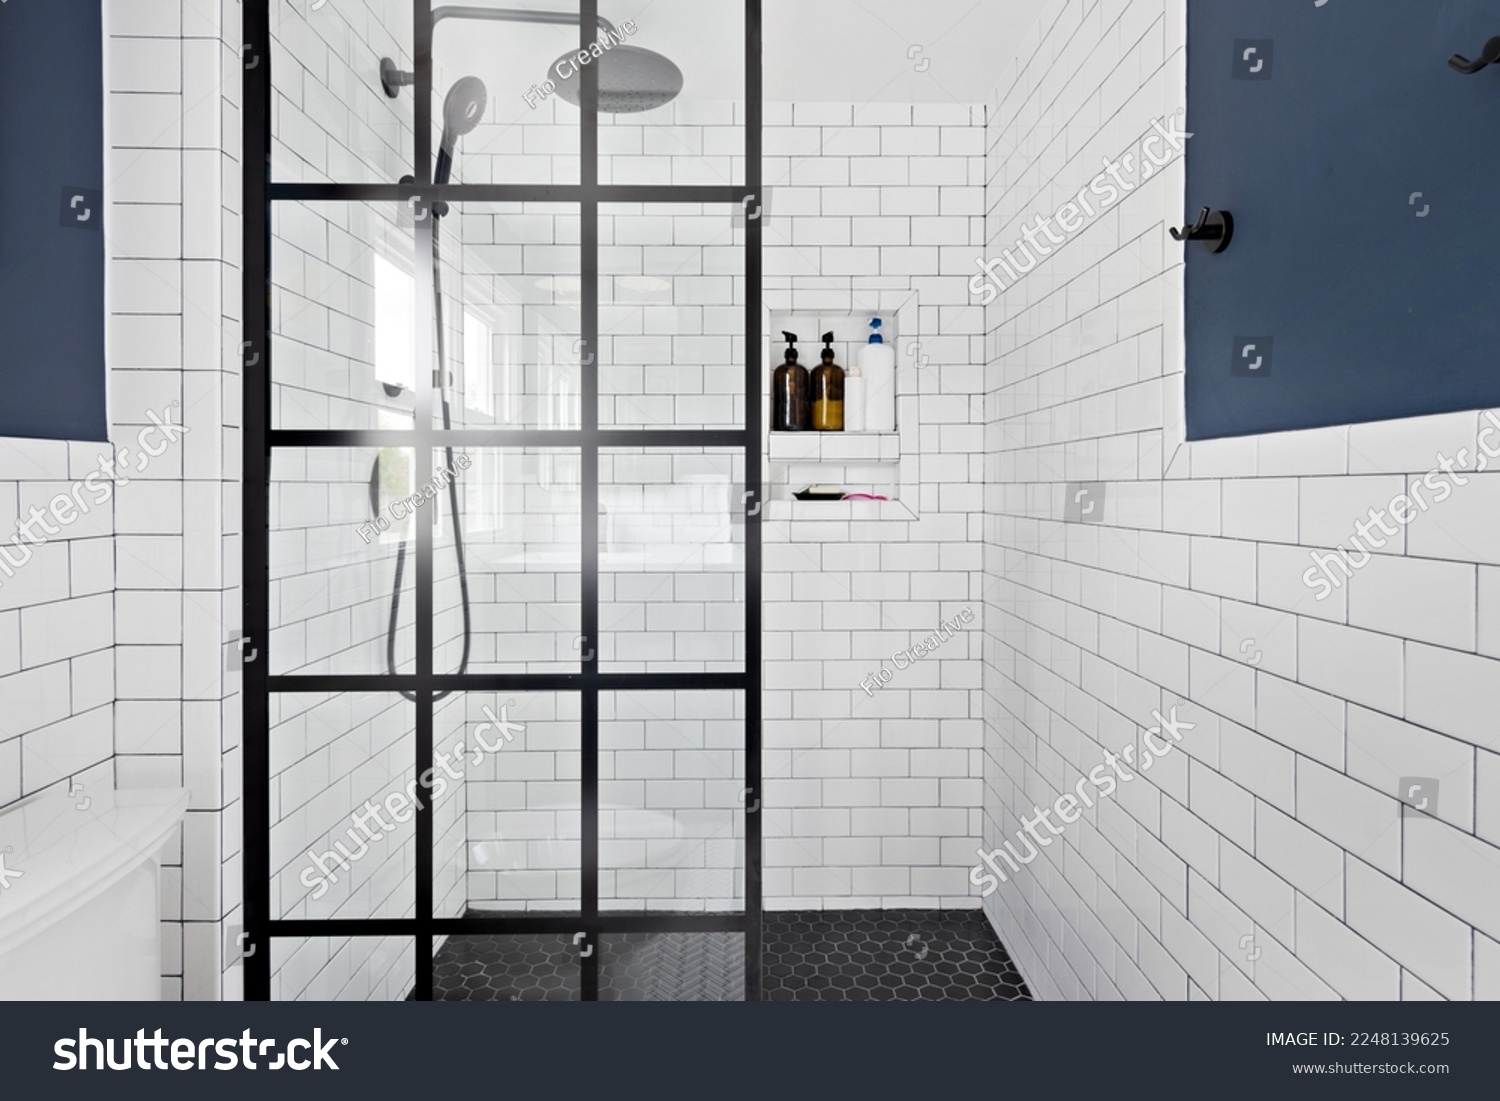 Styled Updated Bathroom Interior. Renovated white bathroom with contemporary design and modern fixtures. Glass enclosed shower with white subway tile and rainfall showerhead. #2248139625